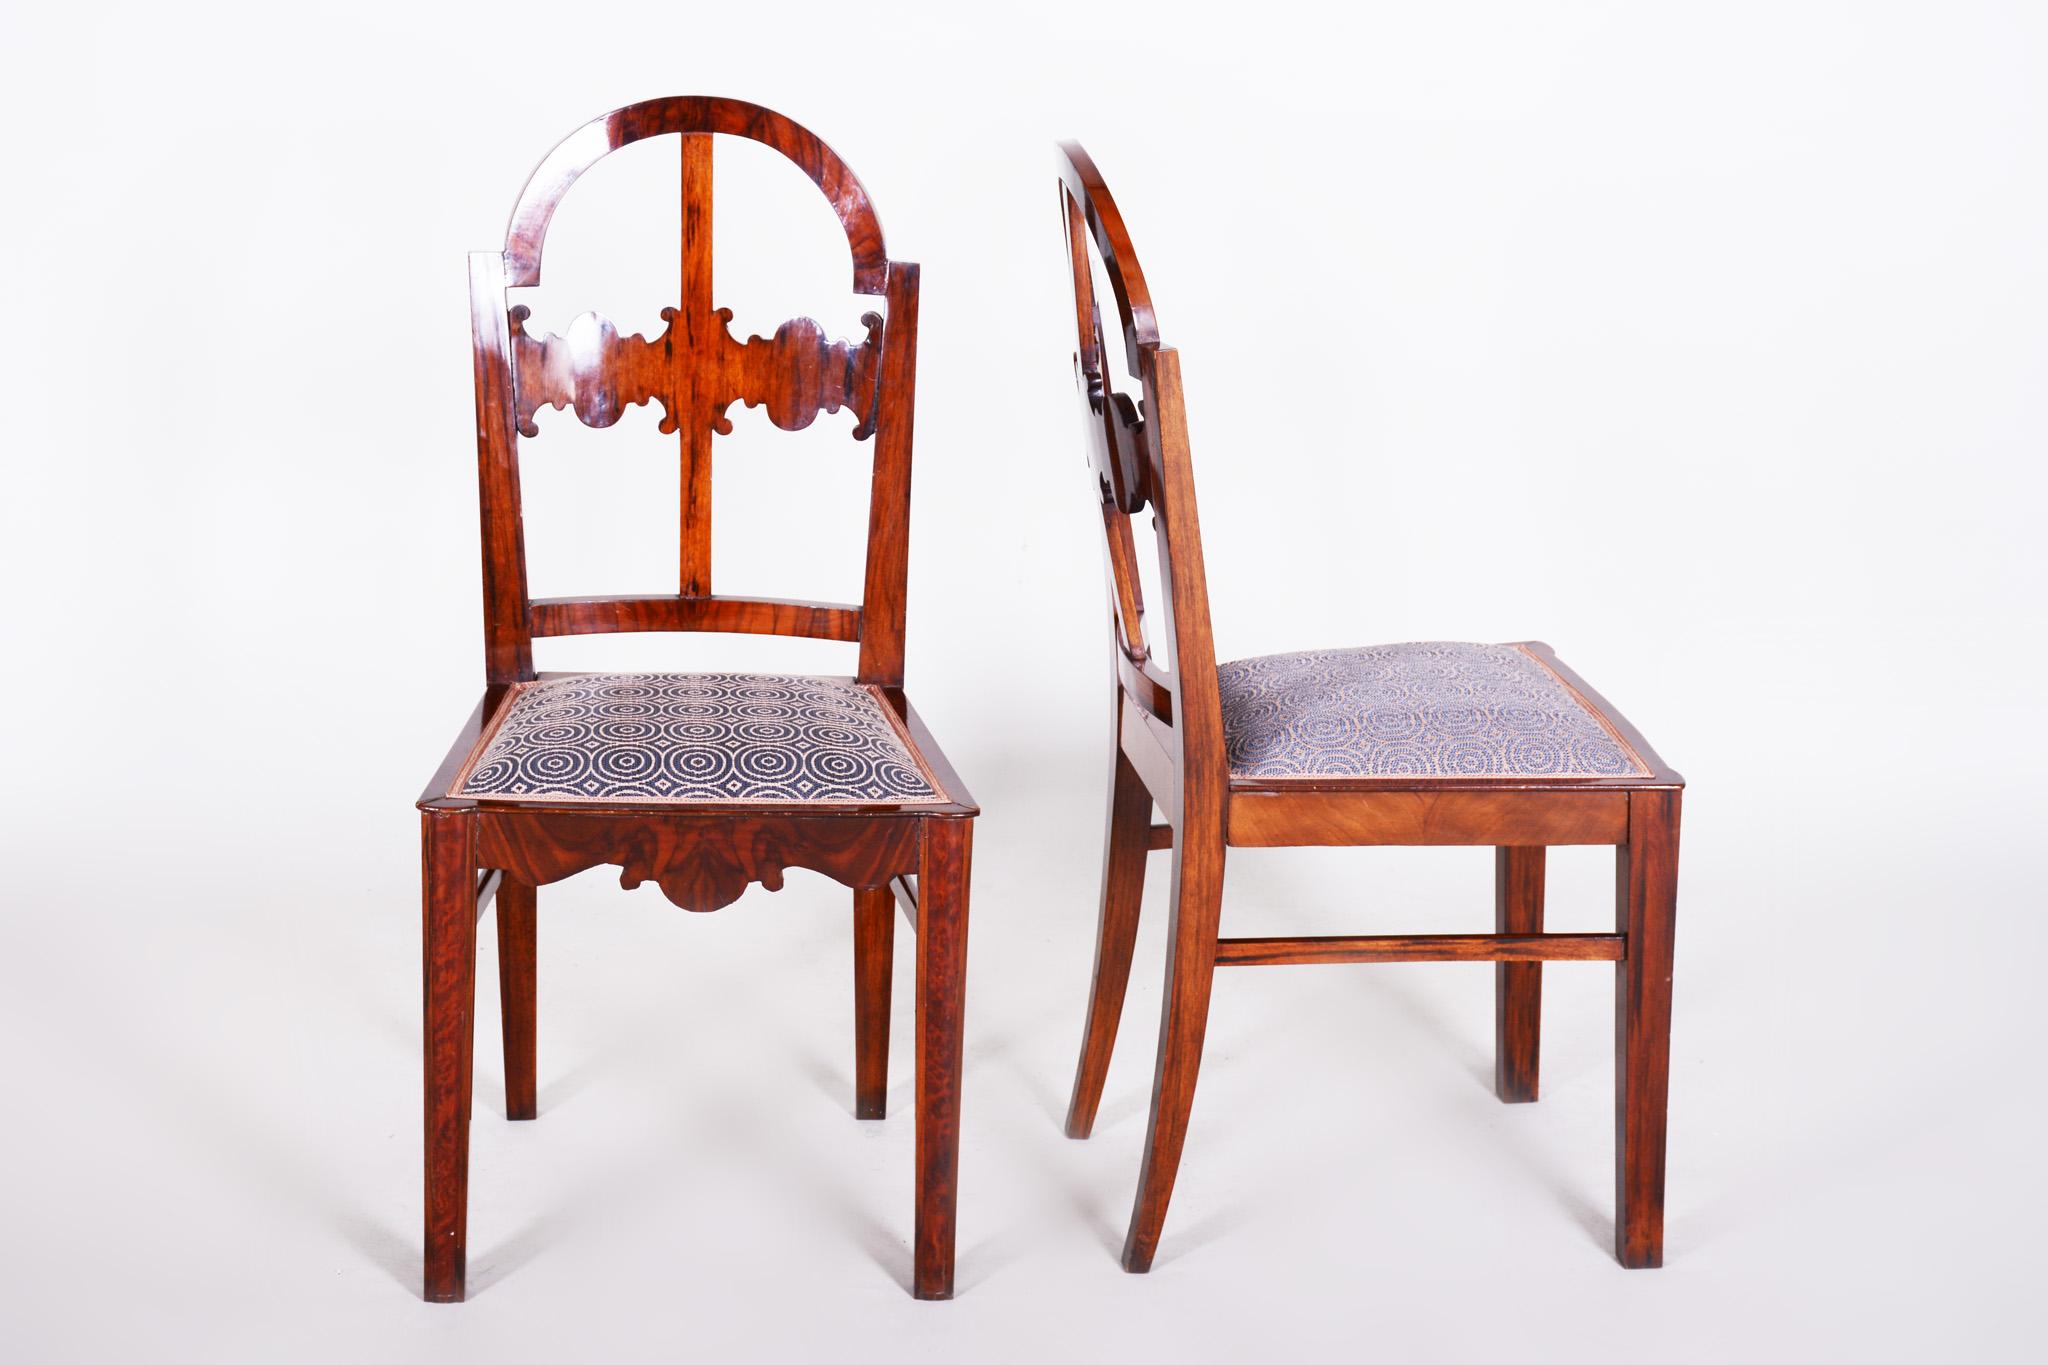 Fabric Walnut Art Deco Seating Set, 2 Armchairs and 4 Chairs, Shellac Polish, 1920s For Sale